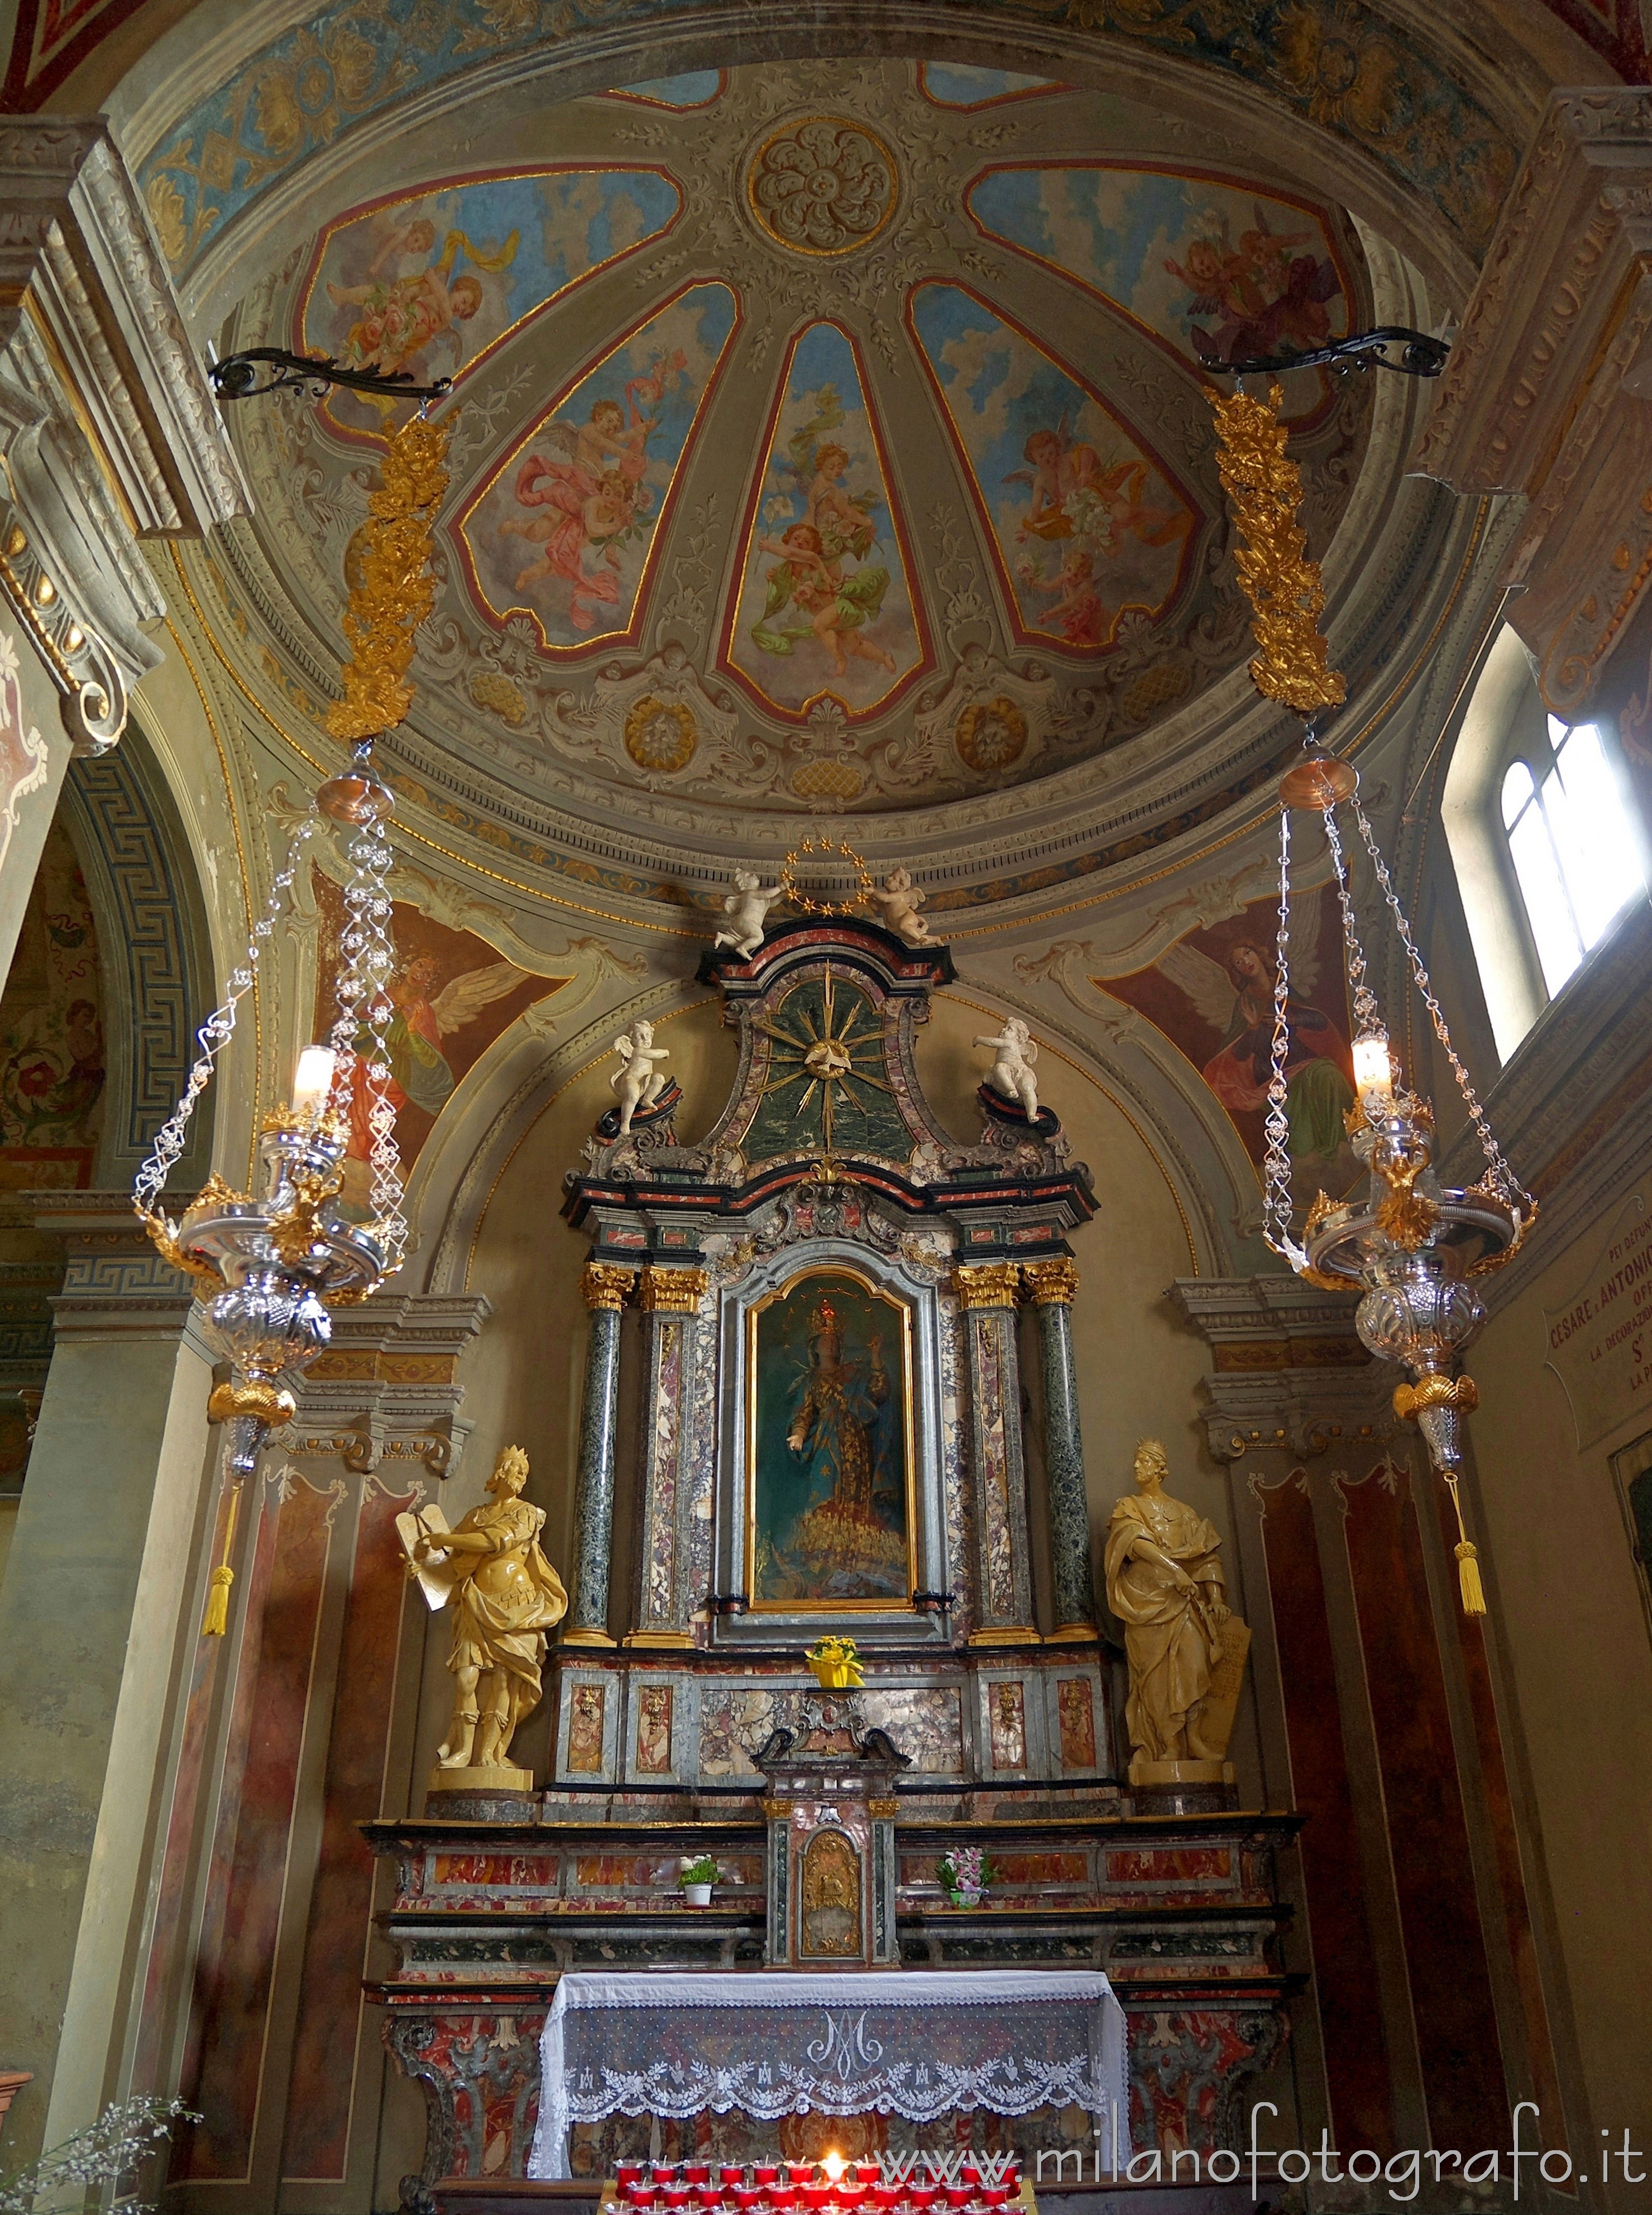 Soncino (Cremona, Italy): Chapel of the Immaculate Conception in the Pieve of Santa Maria Assunta - Soncino (Cremona, Italy)